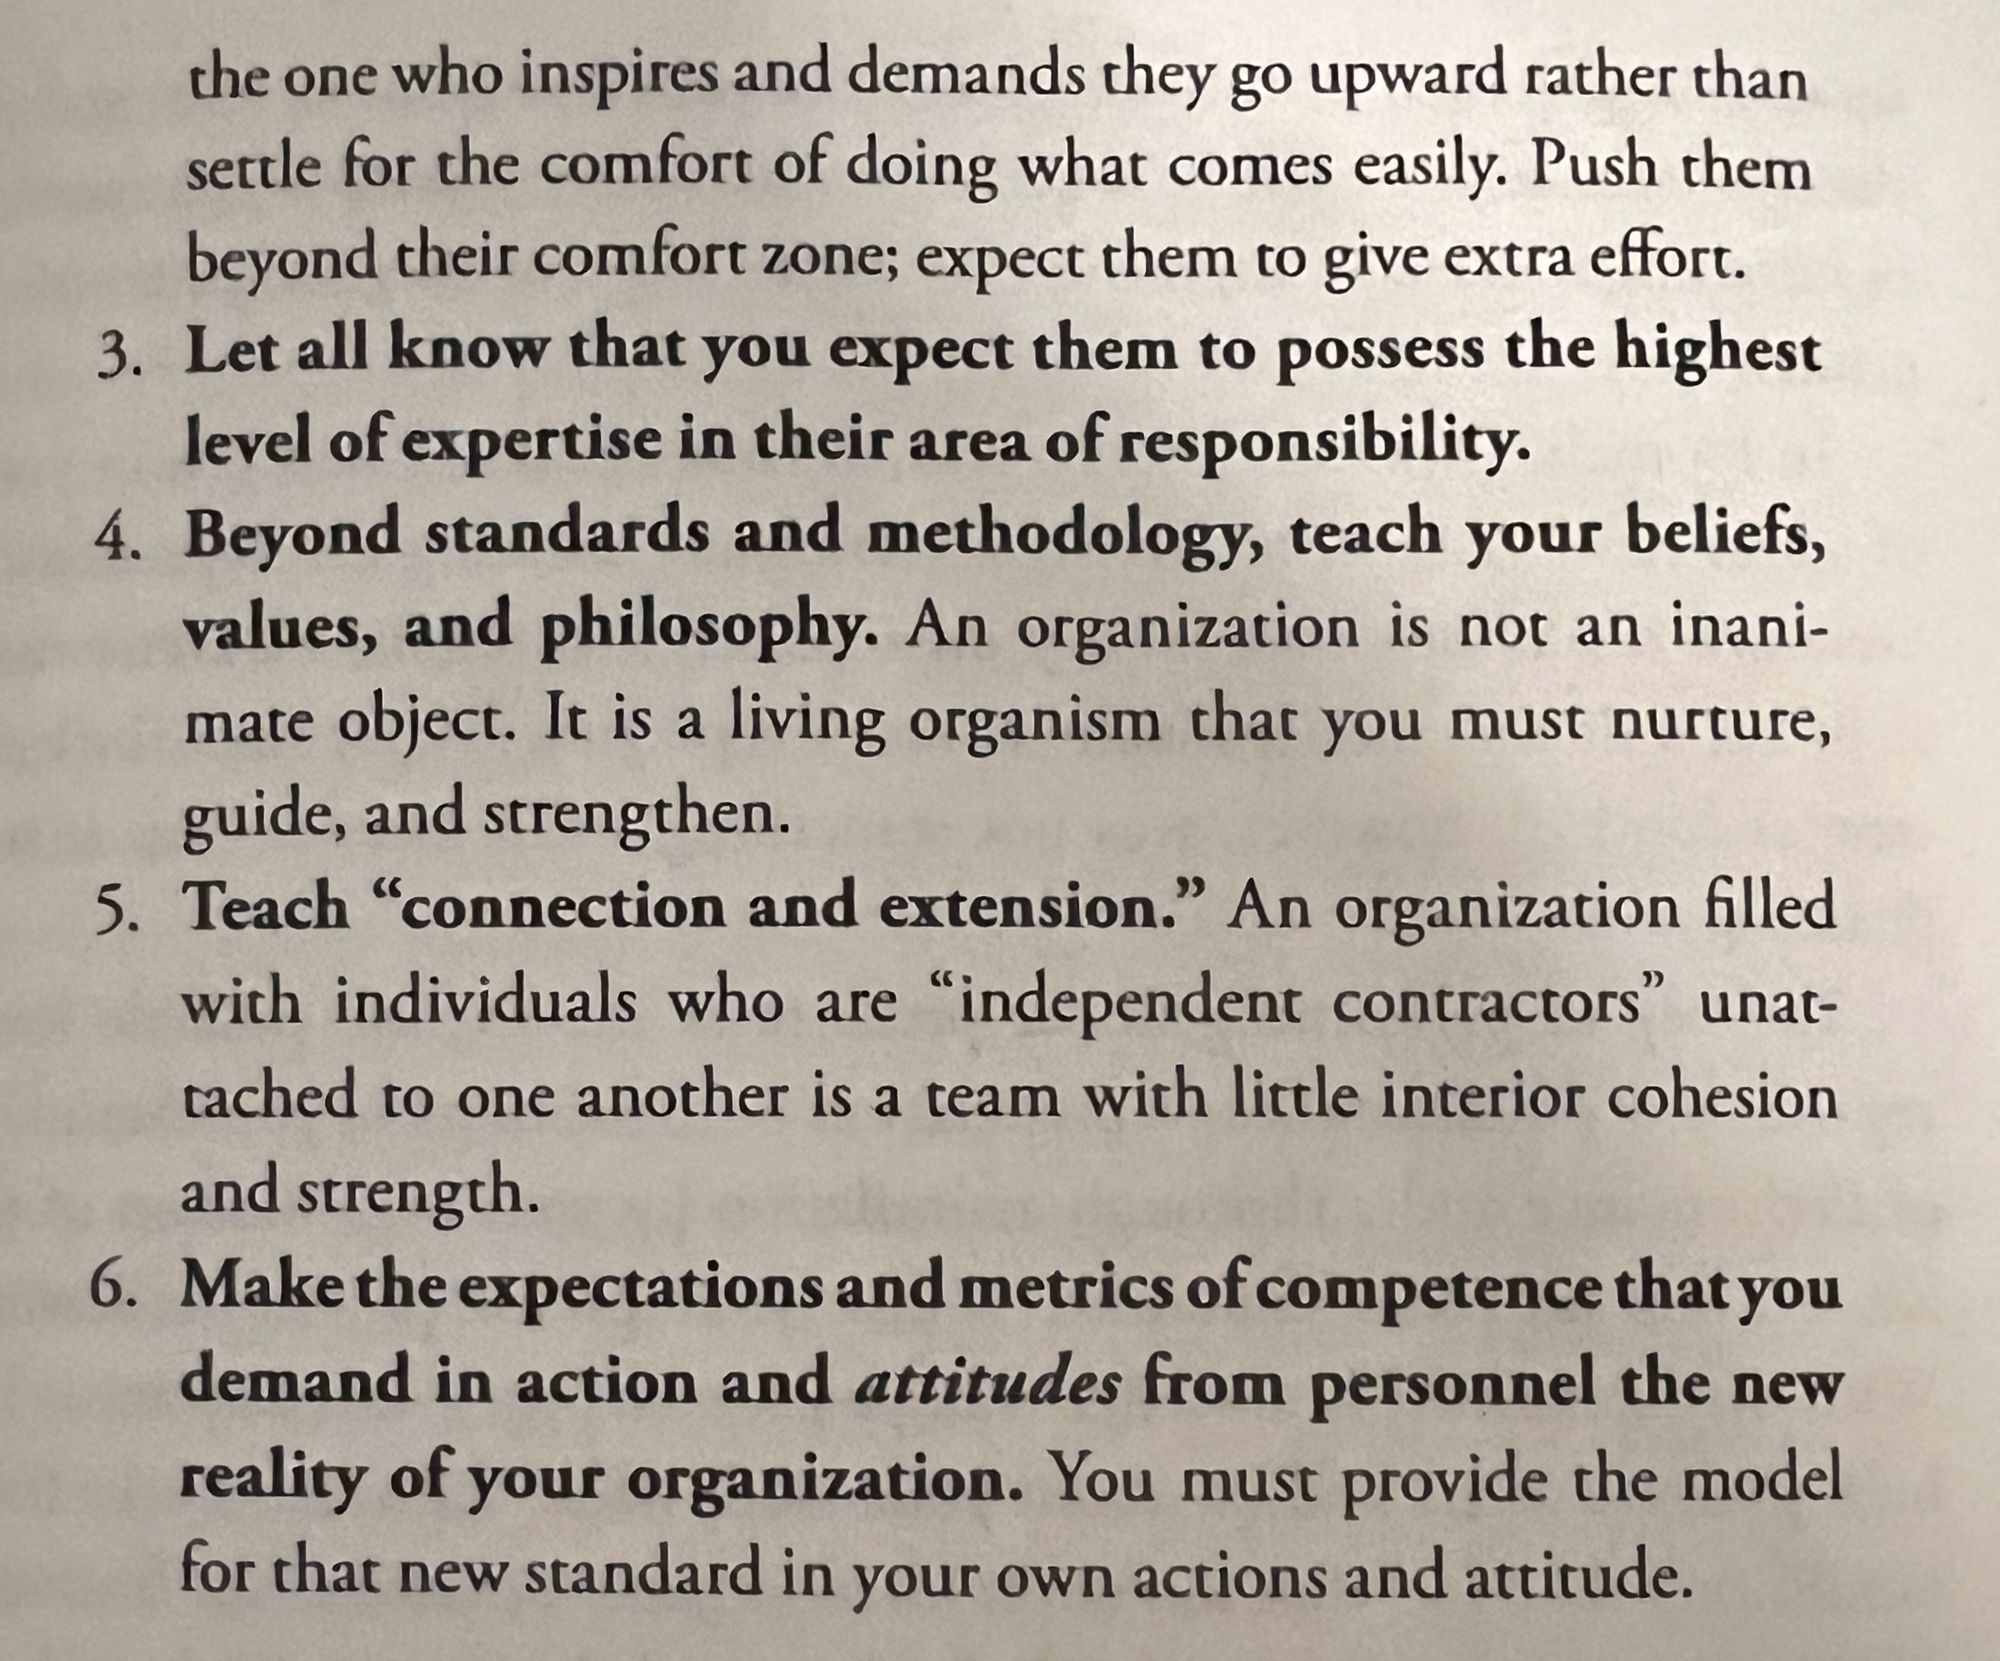 Establishing your standard of performance screenshot from the book